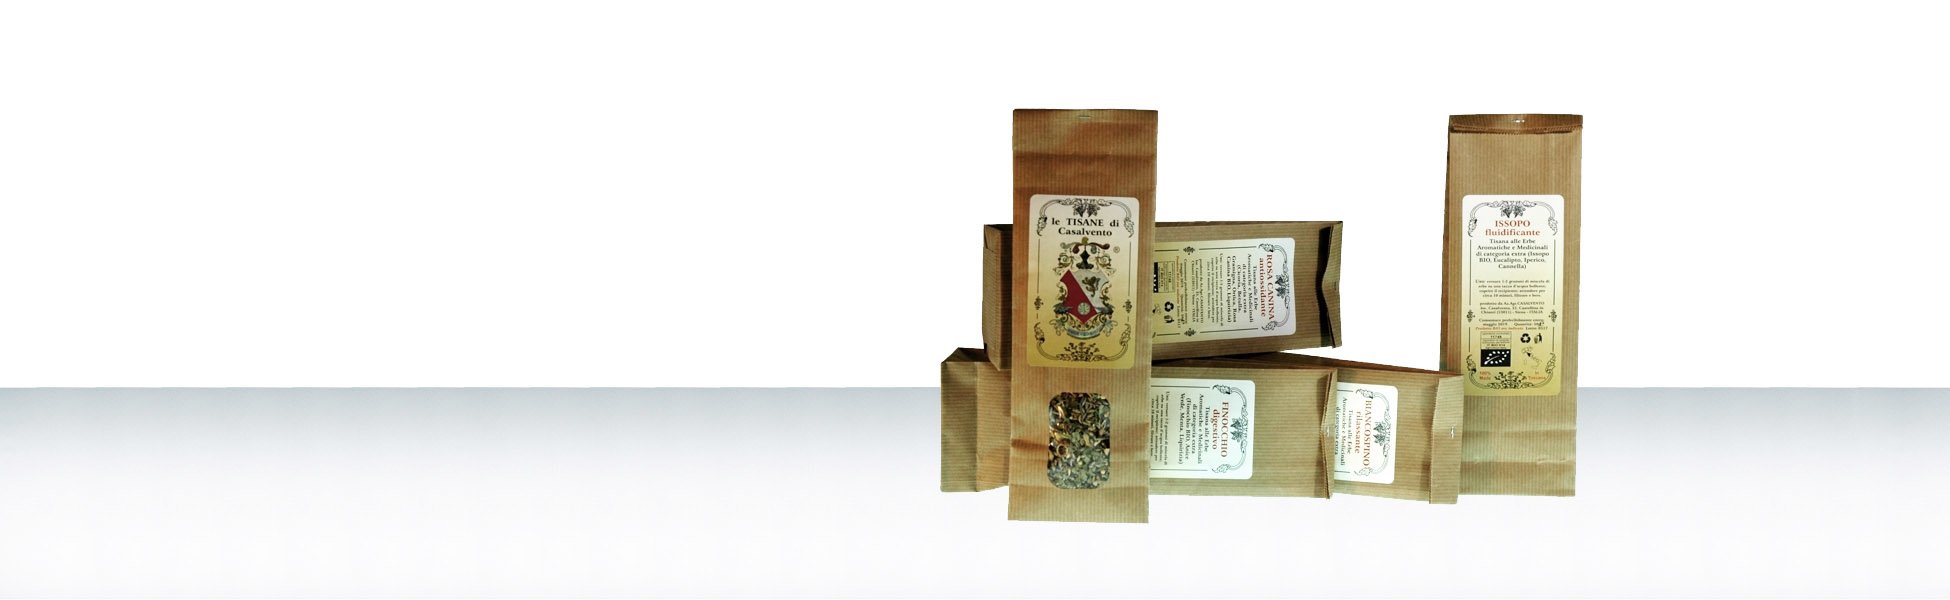 On a bright light top, 5 paper bags for herbal teas with organic dried herbs; heraldic label of Casalvento